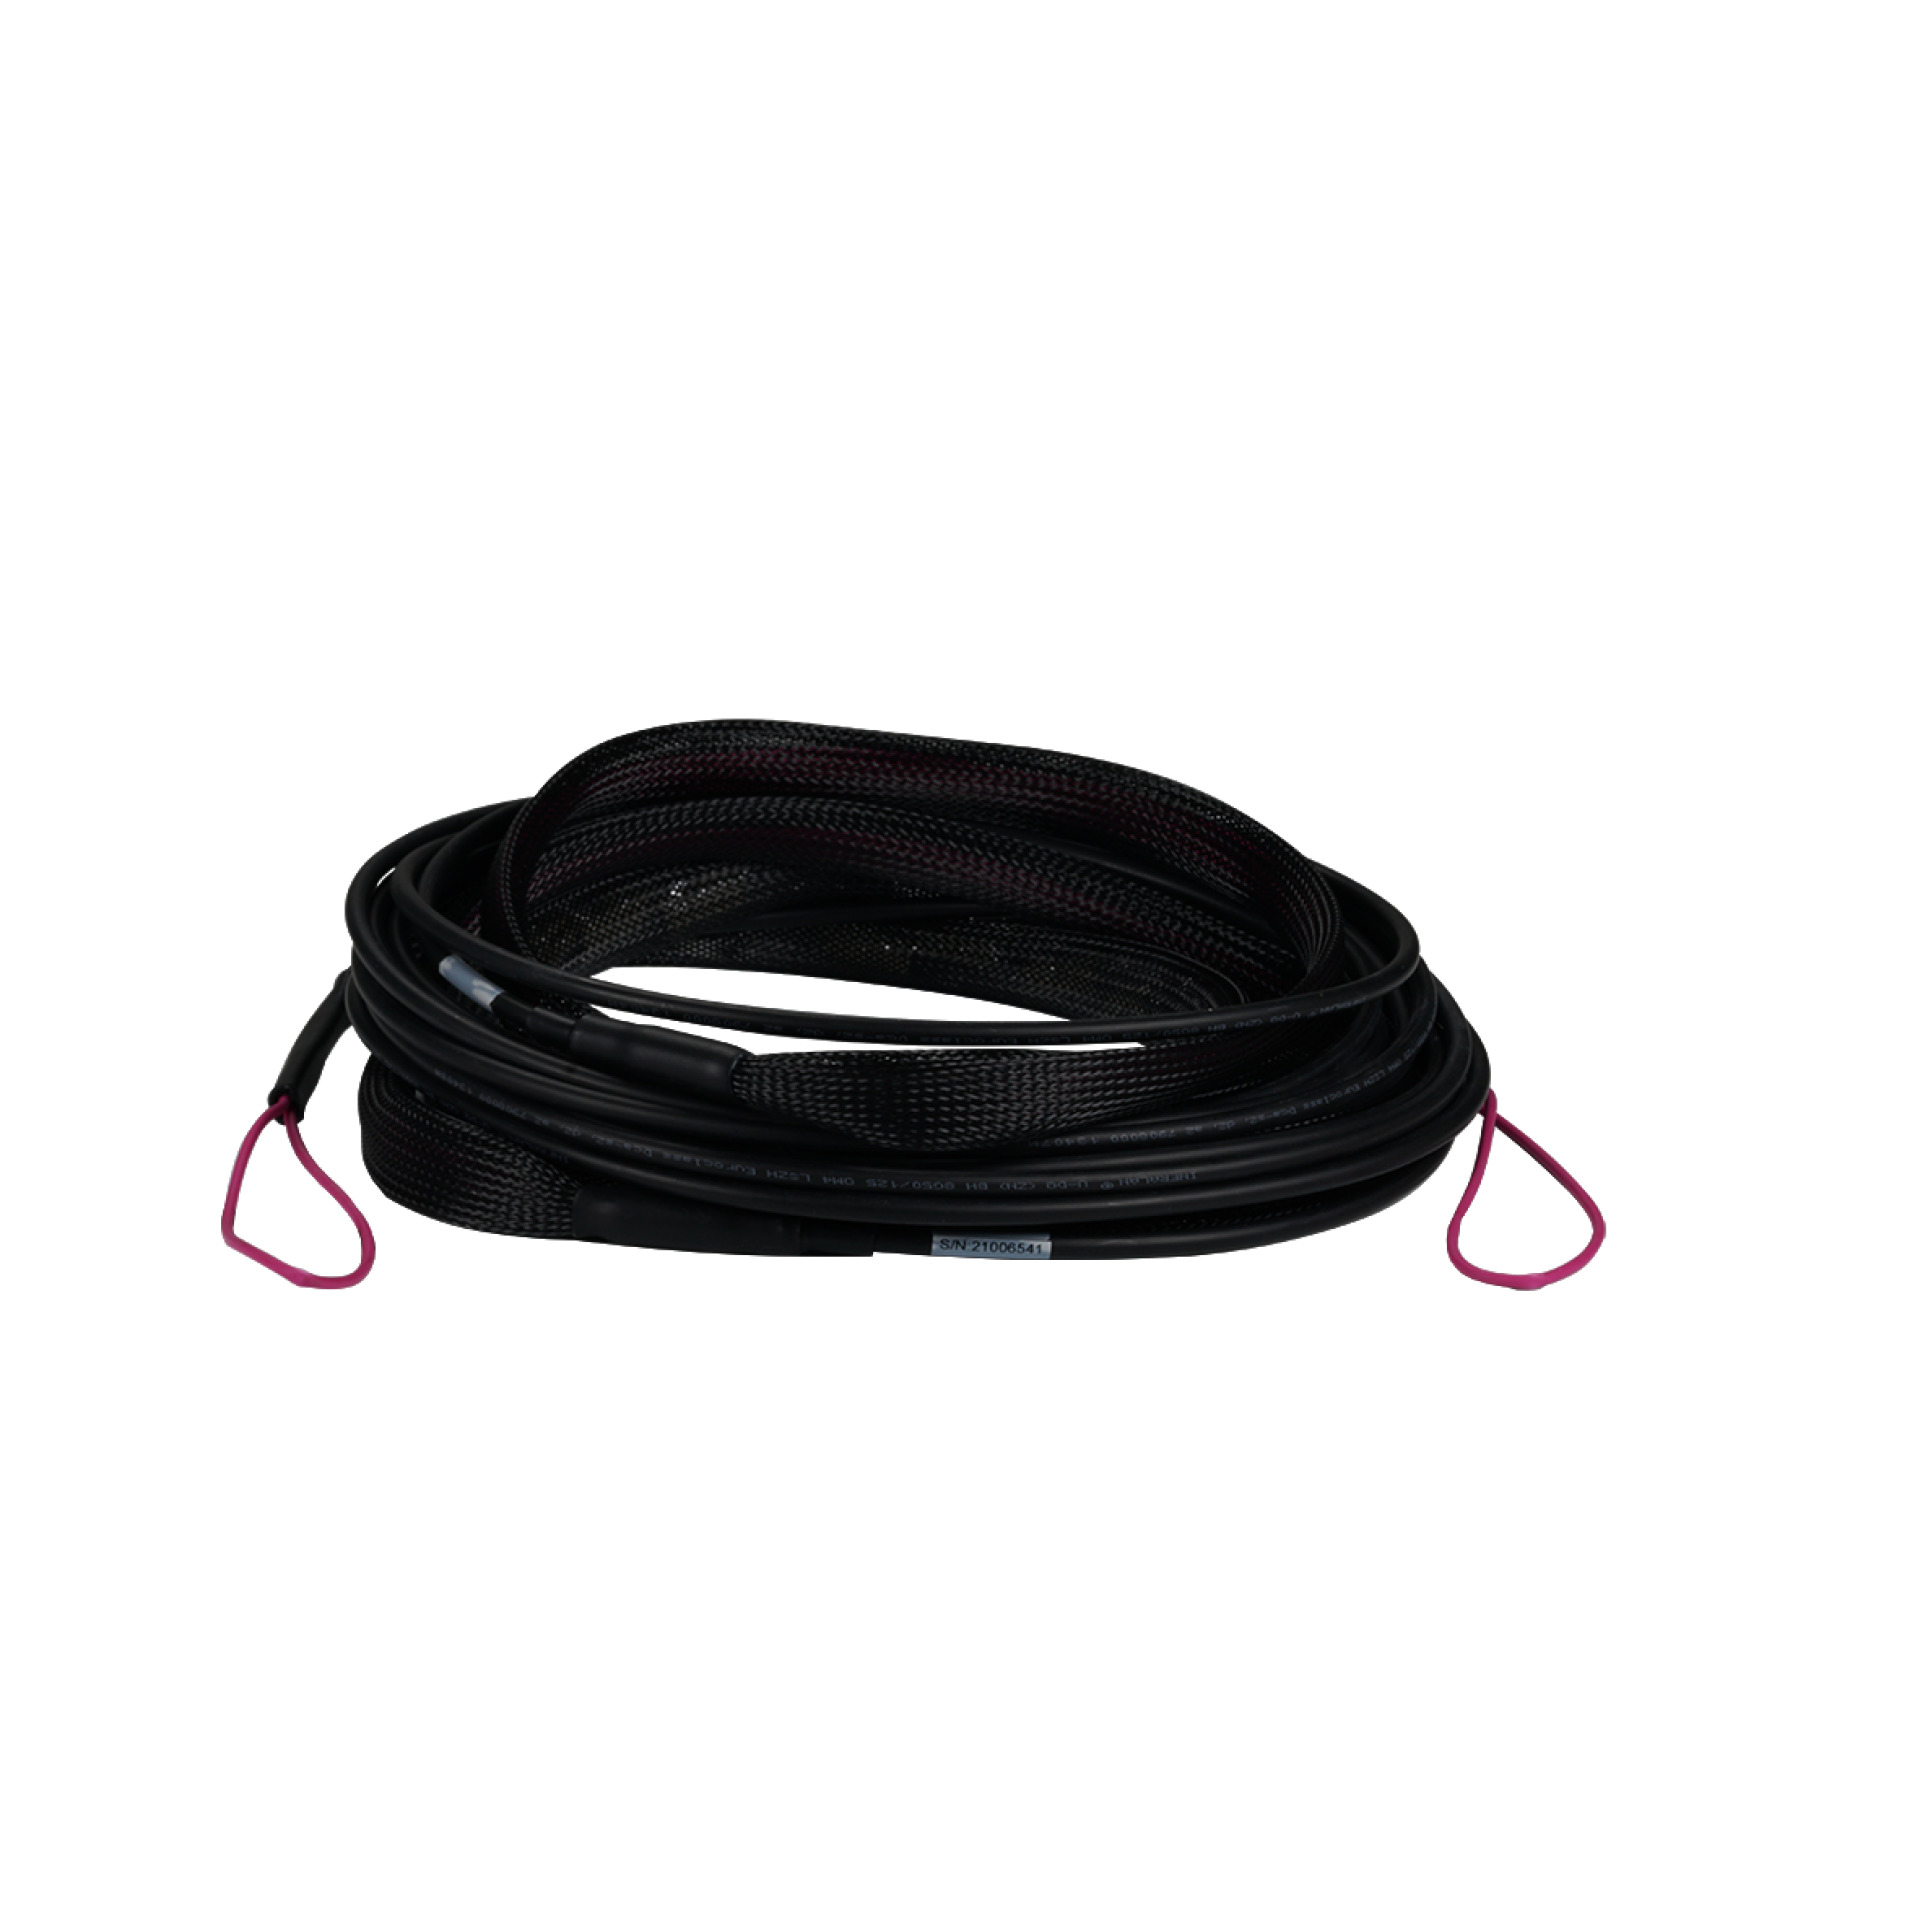 Trunk cable U-DQ(ZN)BH 12G 50/125, SC/SC OM4 80m